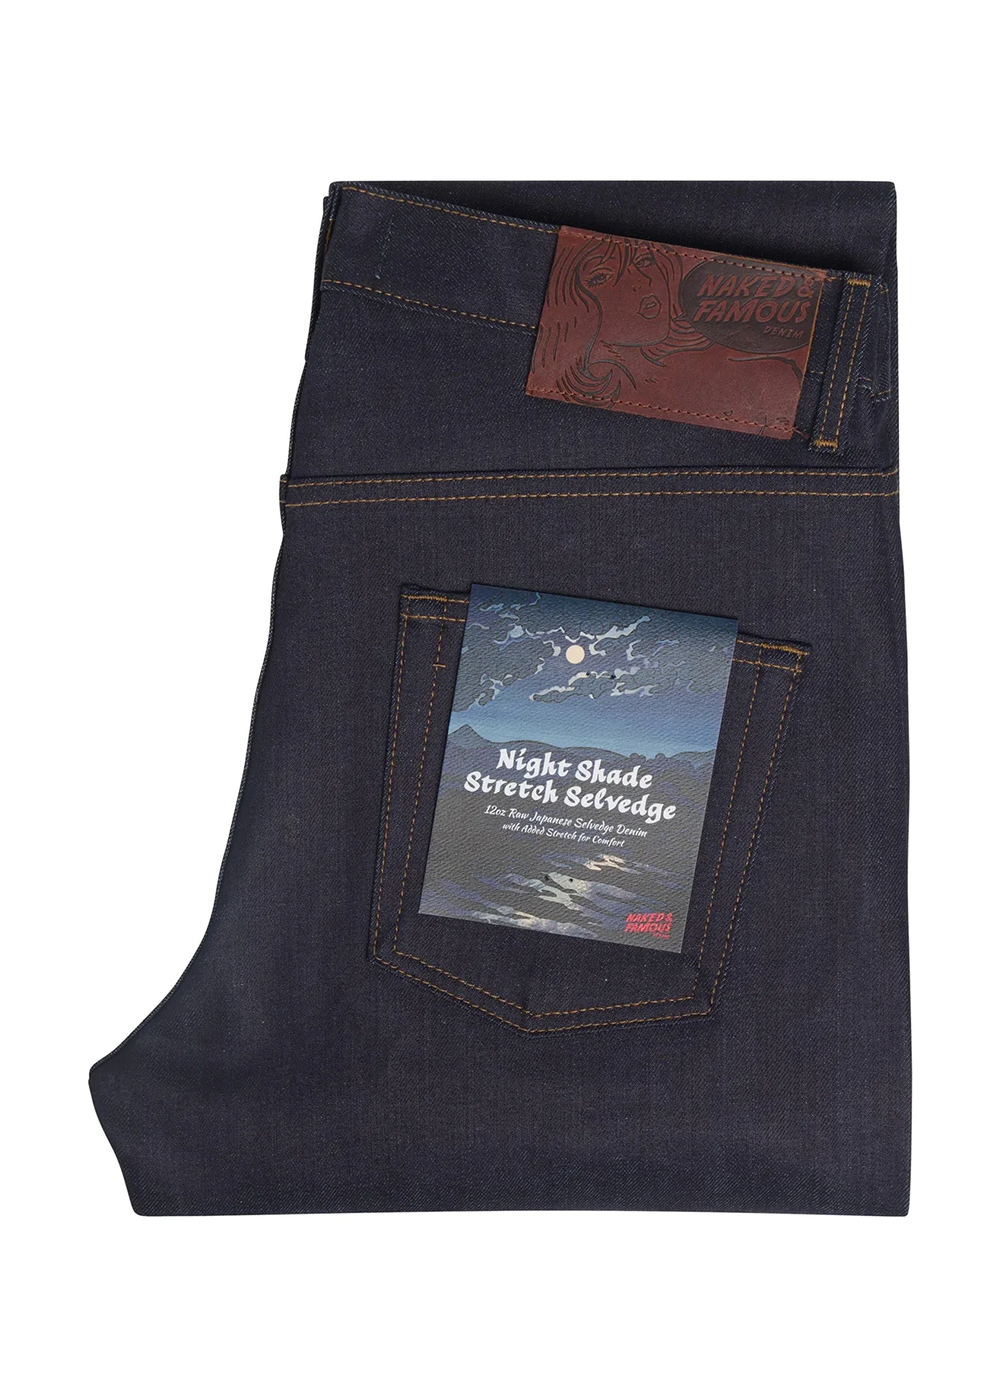 Easy Guy Nightshade Stretch Selvedge - Naked and Famous Denim Canada - Danali - 101098006